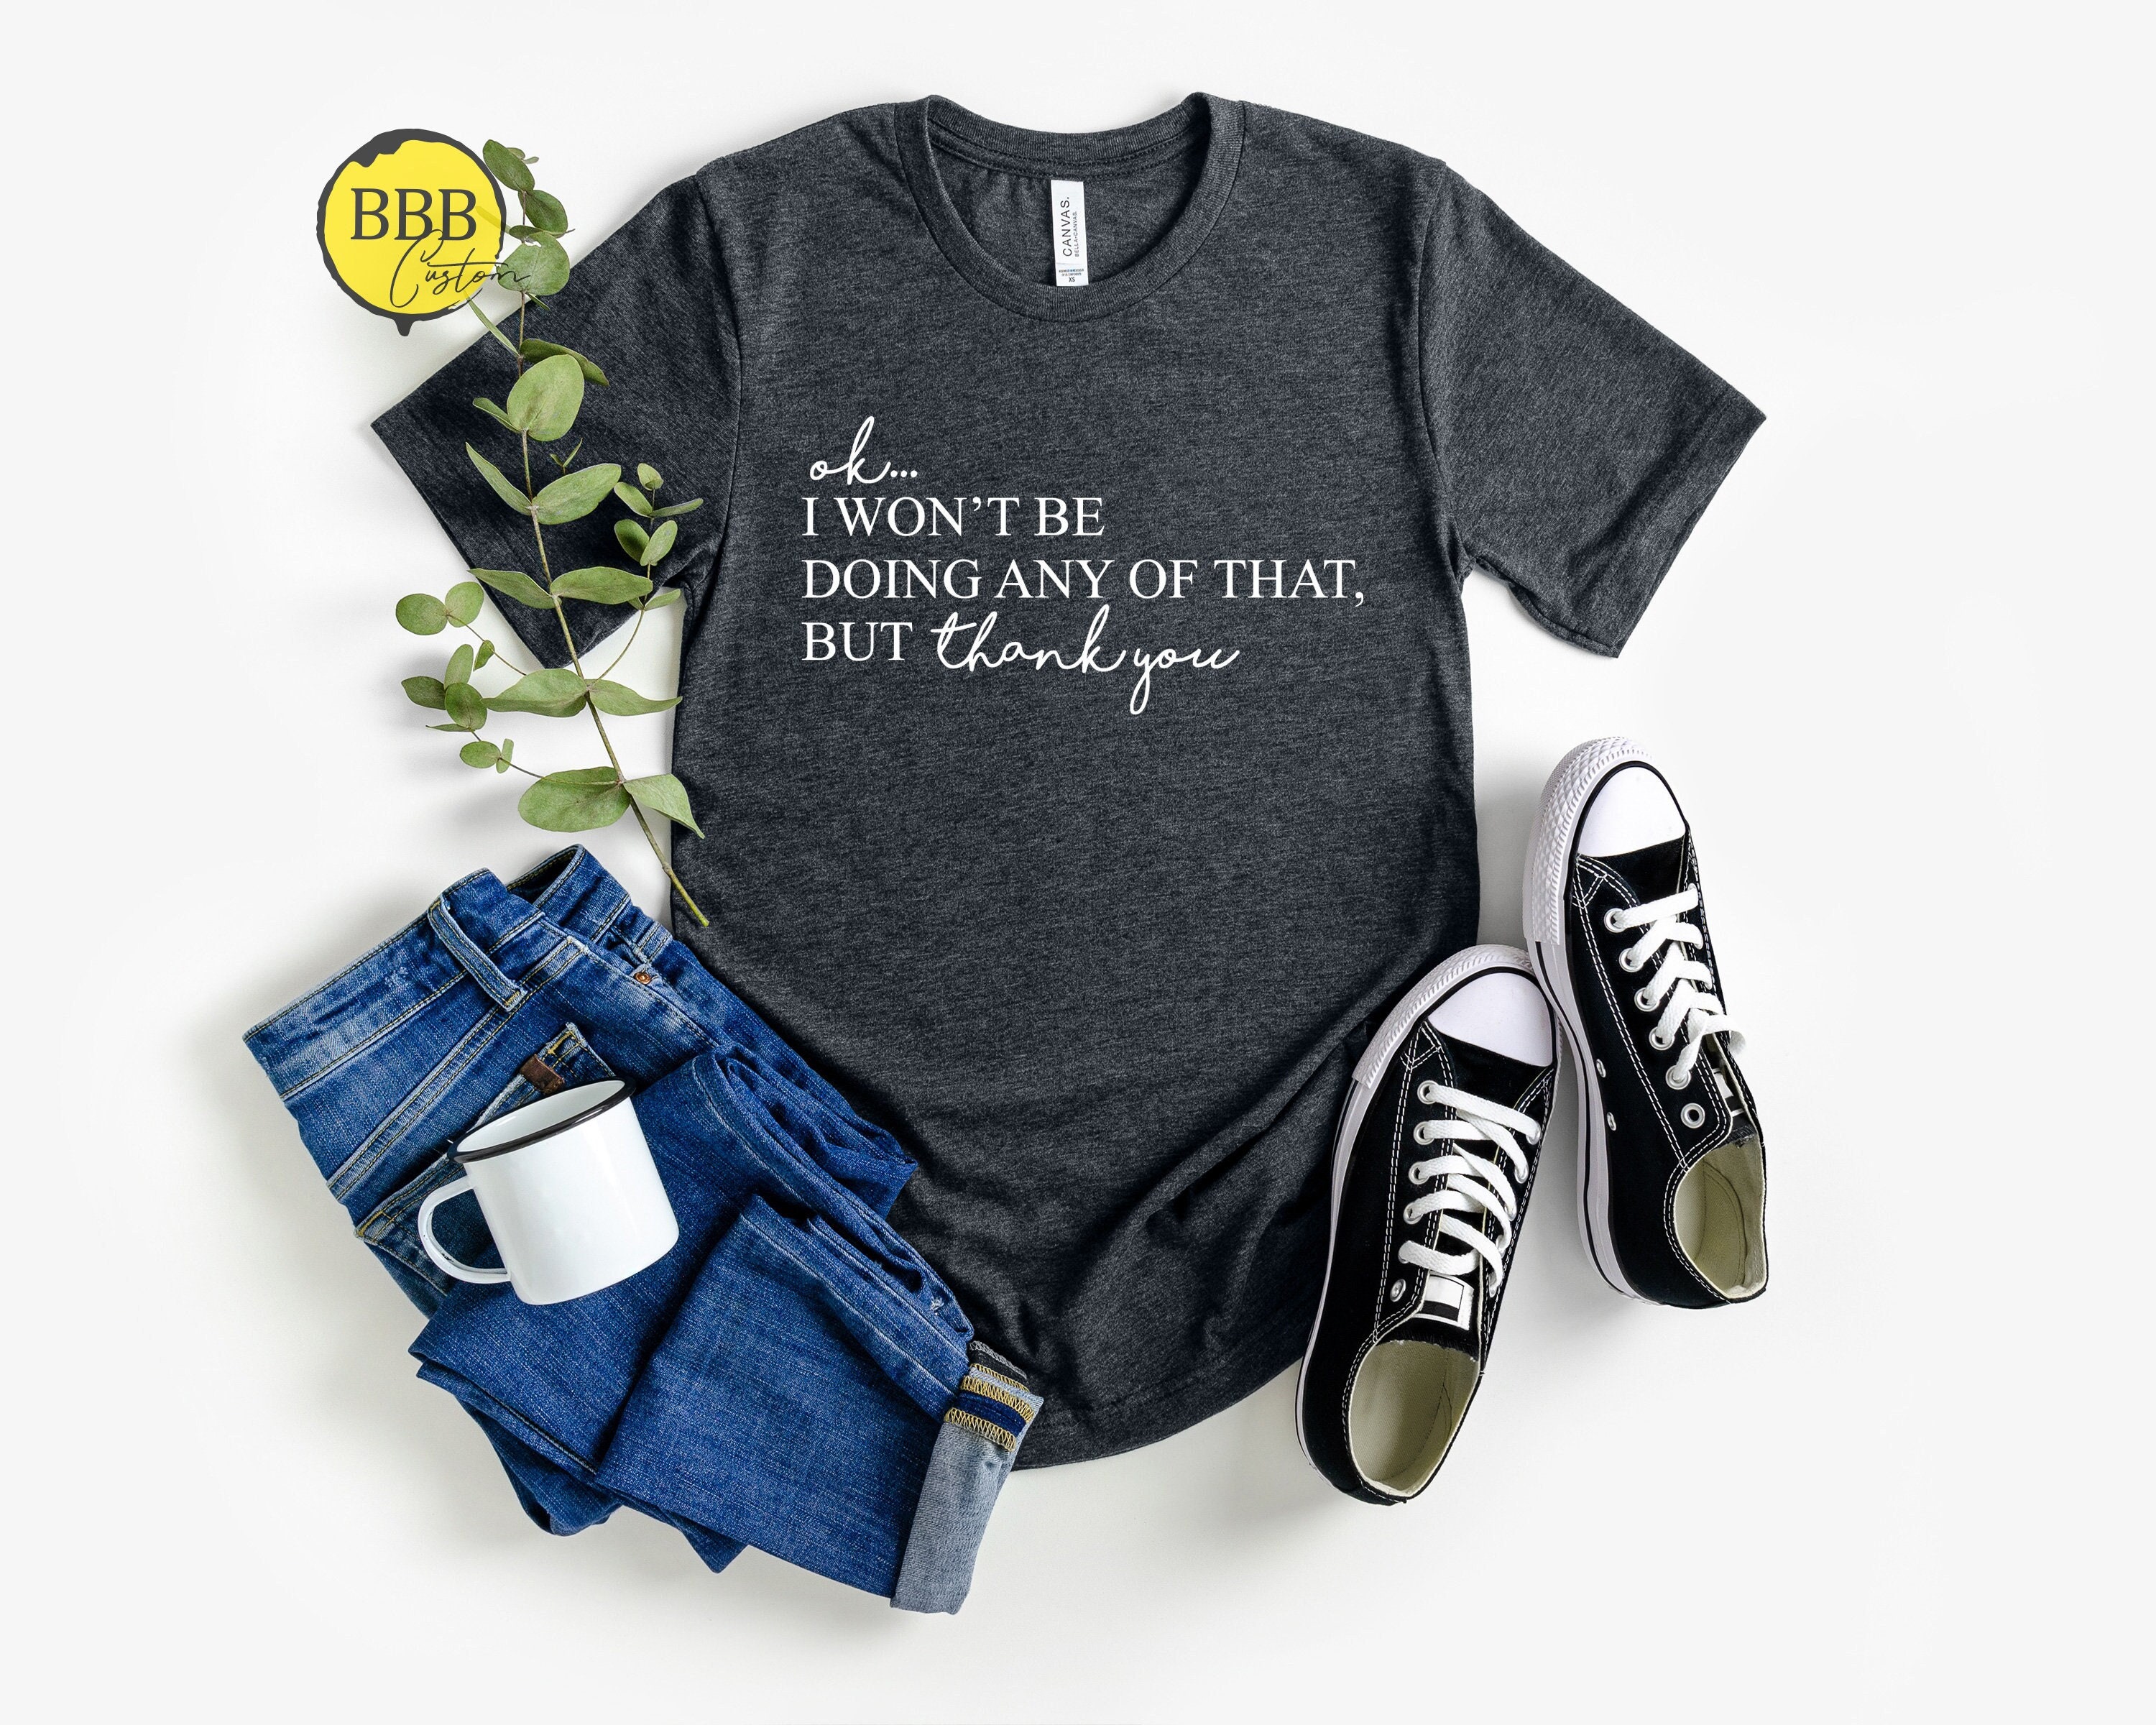 Ok, I Won't Be Doing Any Of That But Thank You Shirt, Funny Shirt, TV Show Shirt